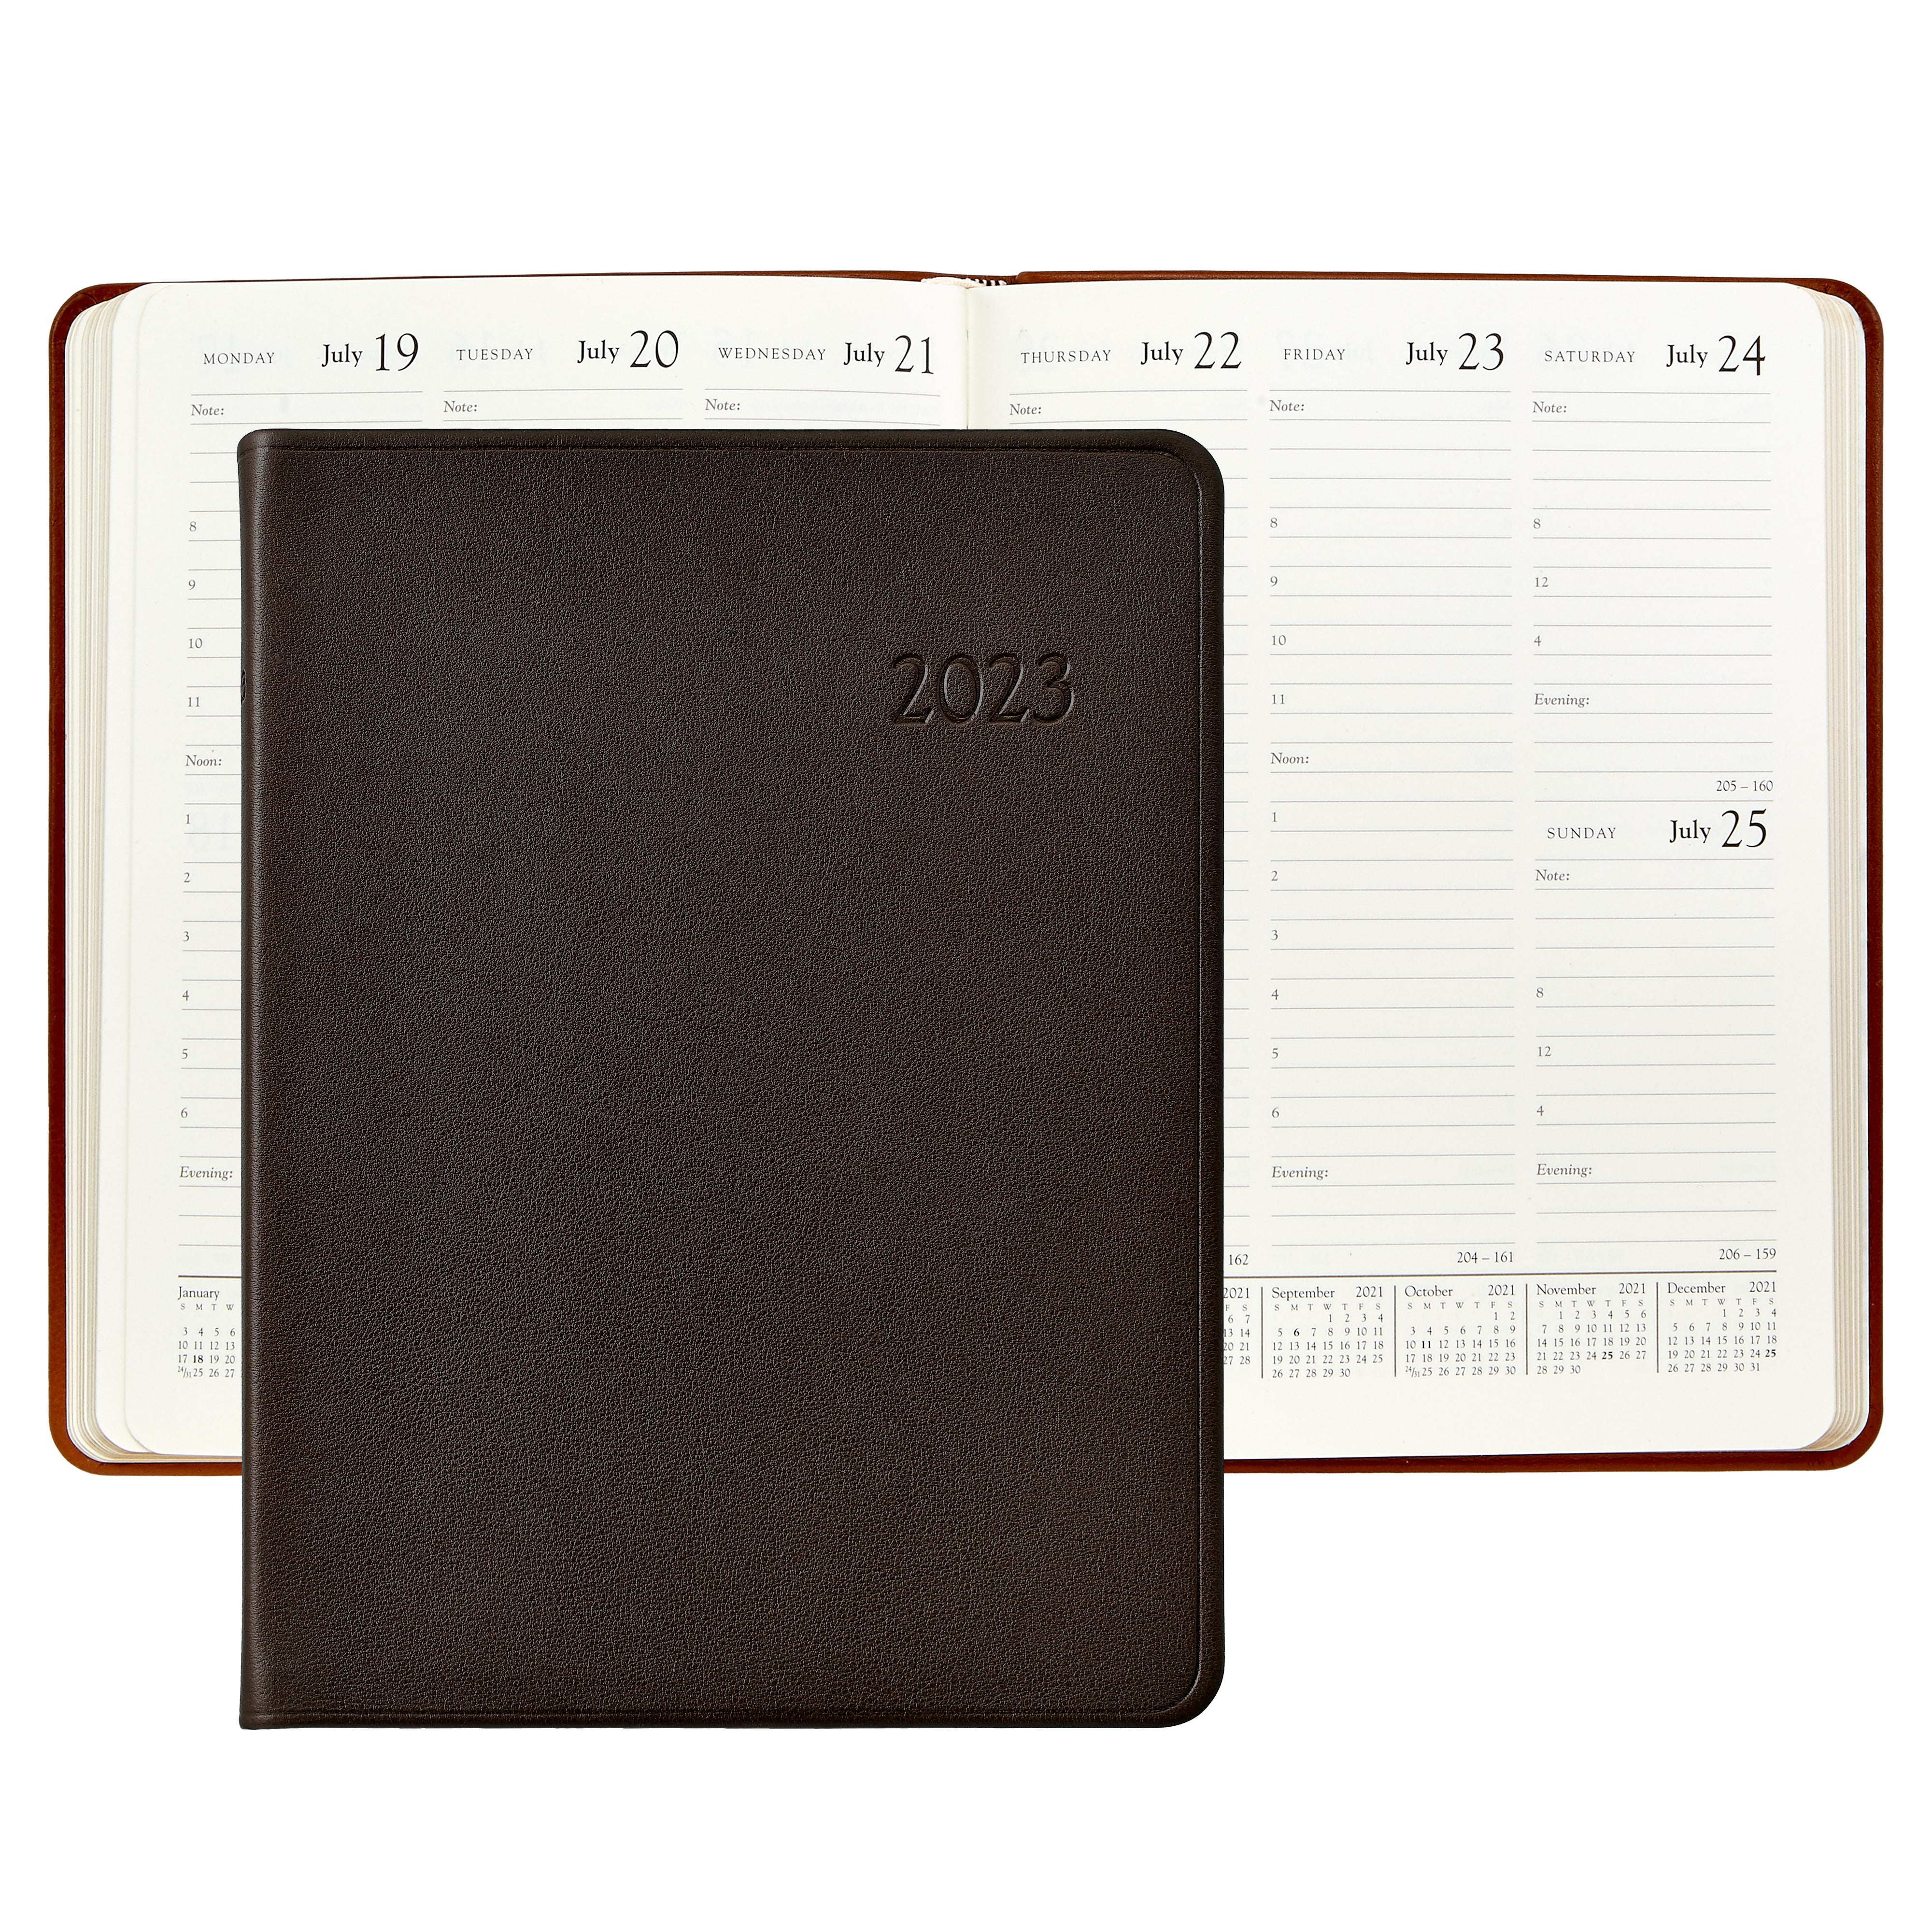 2023 Desk Diary Agenda Planner | Brown Traditional Leather – Graphic Image